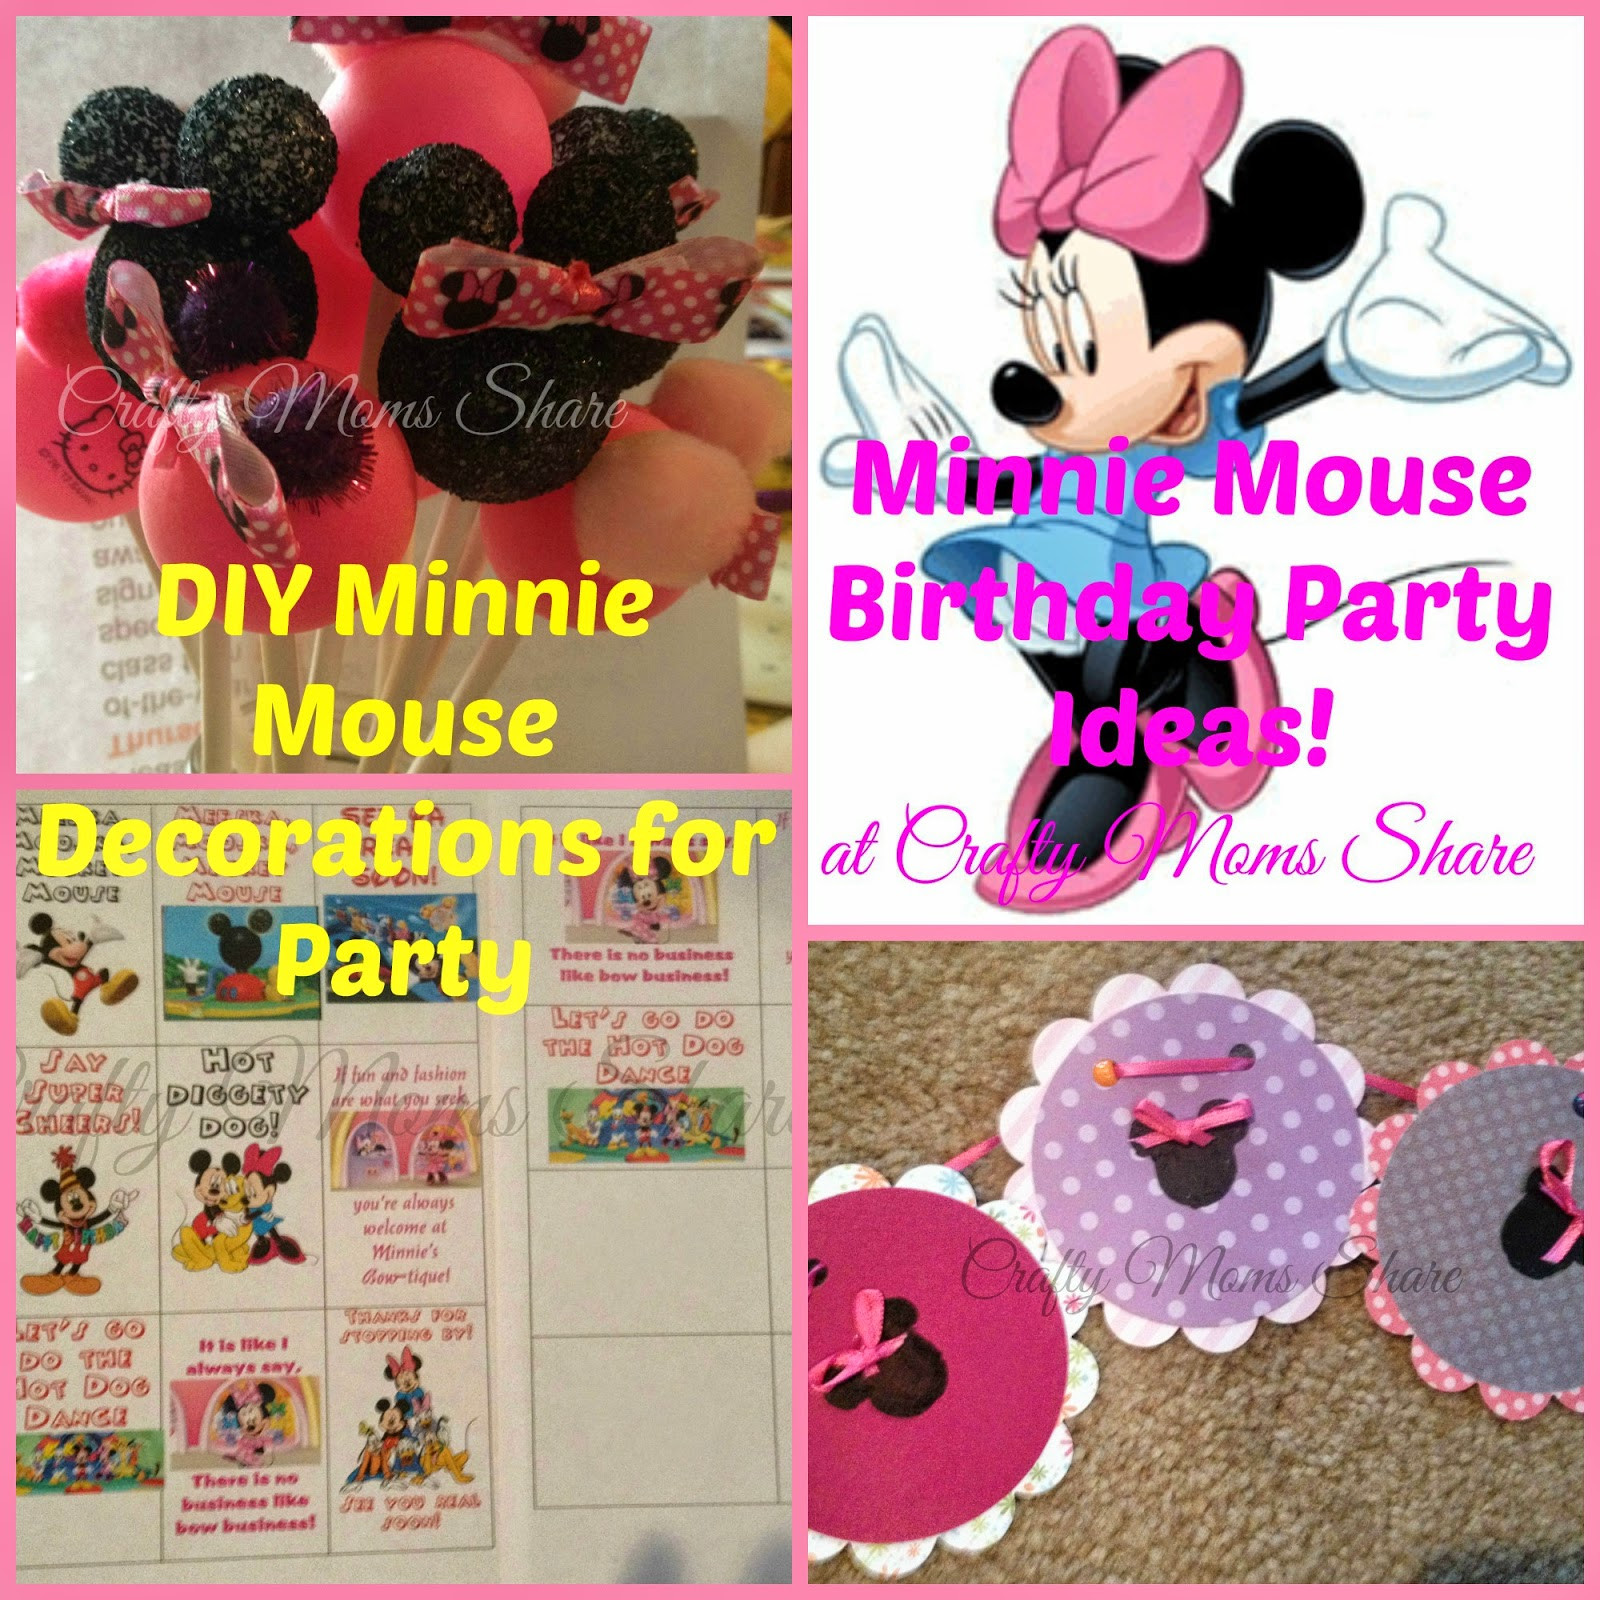 DIY Minnie Mouse Party Decorations
 Crafty Moms Minnie Mouse Birthday Party DIY